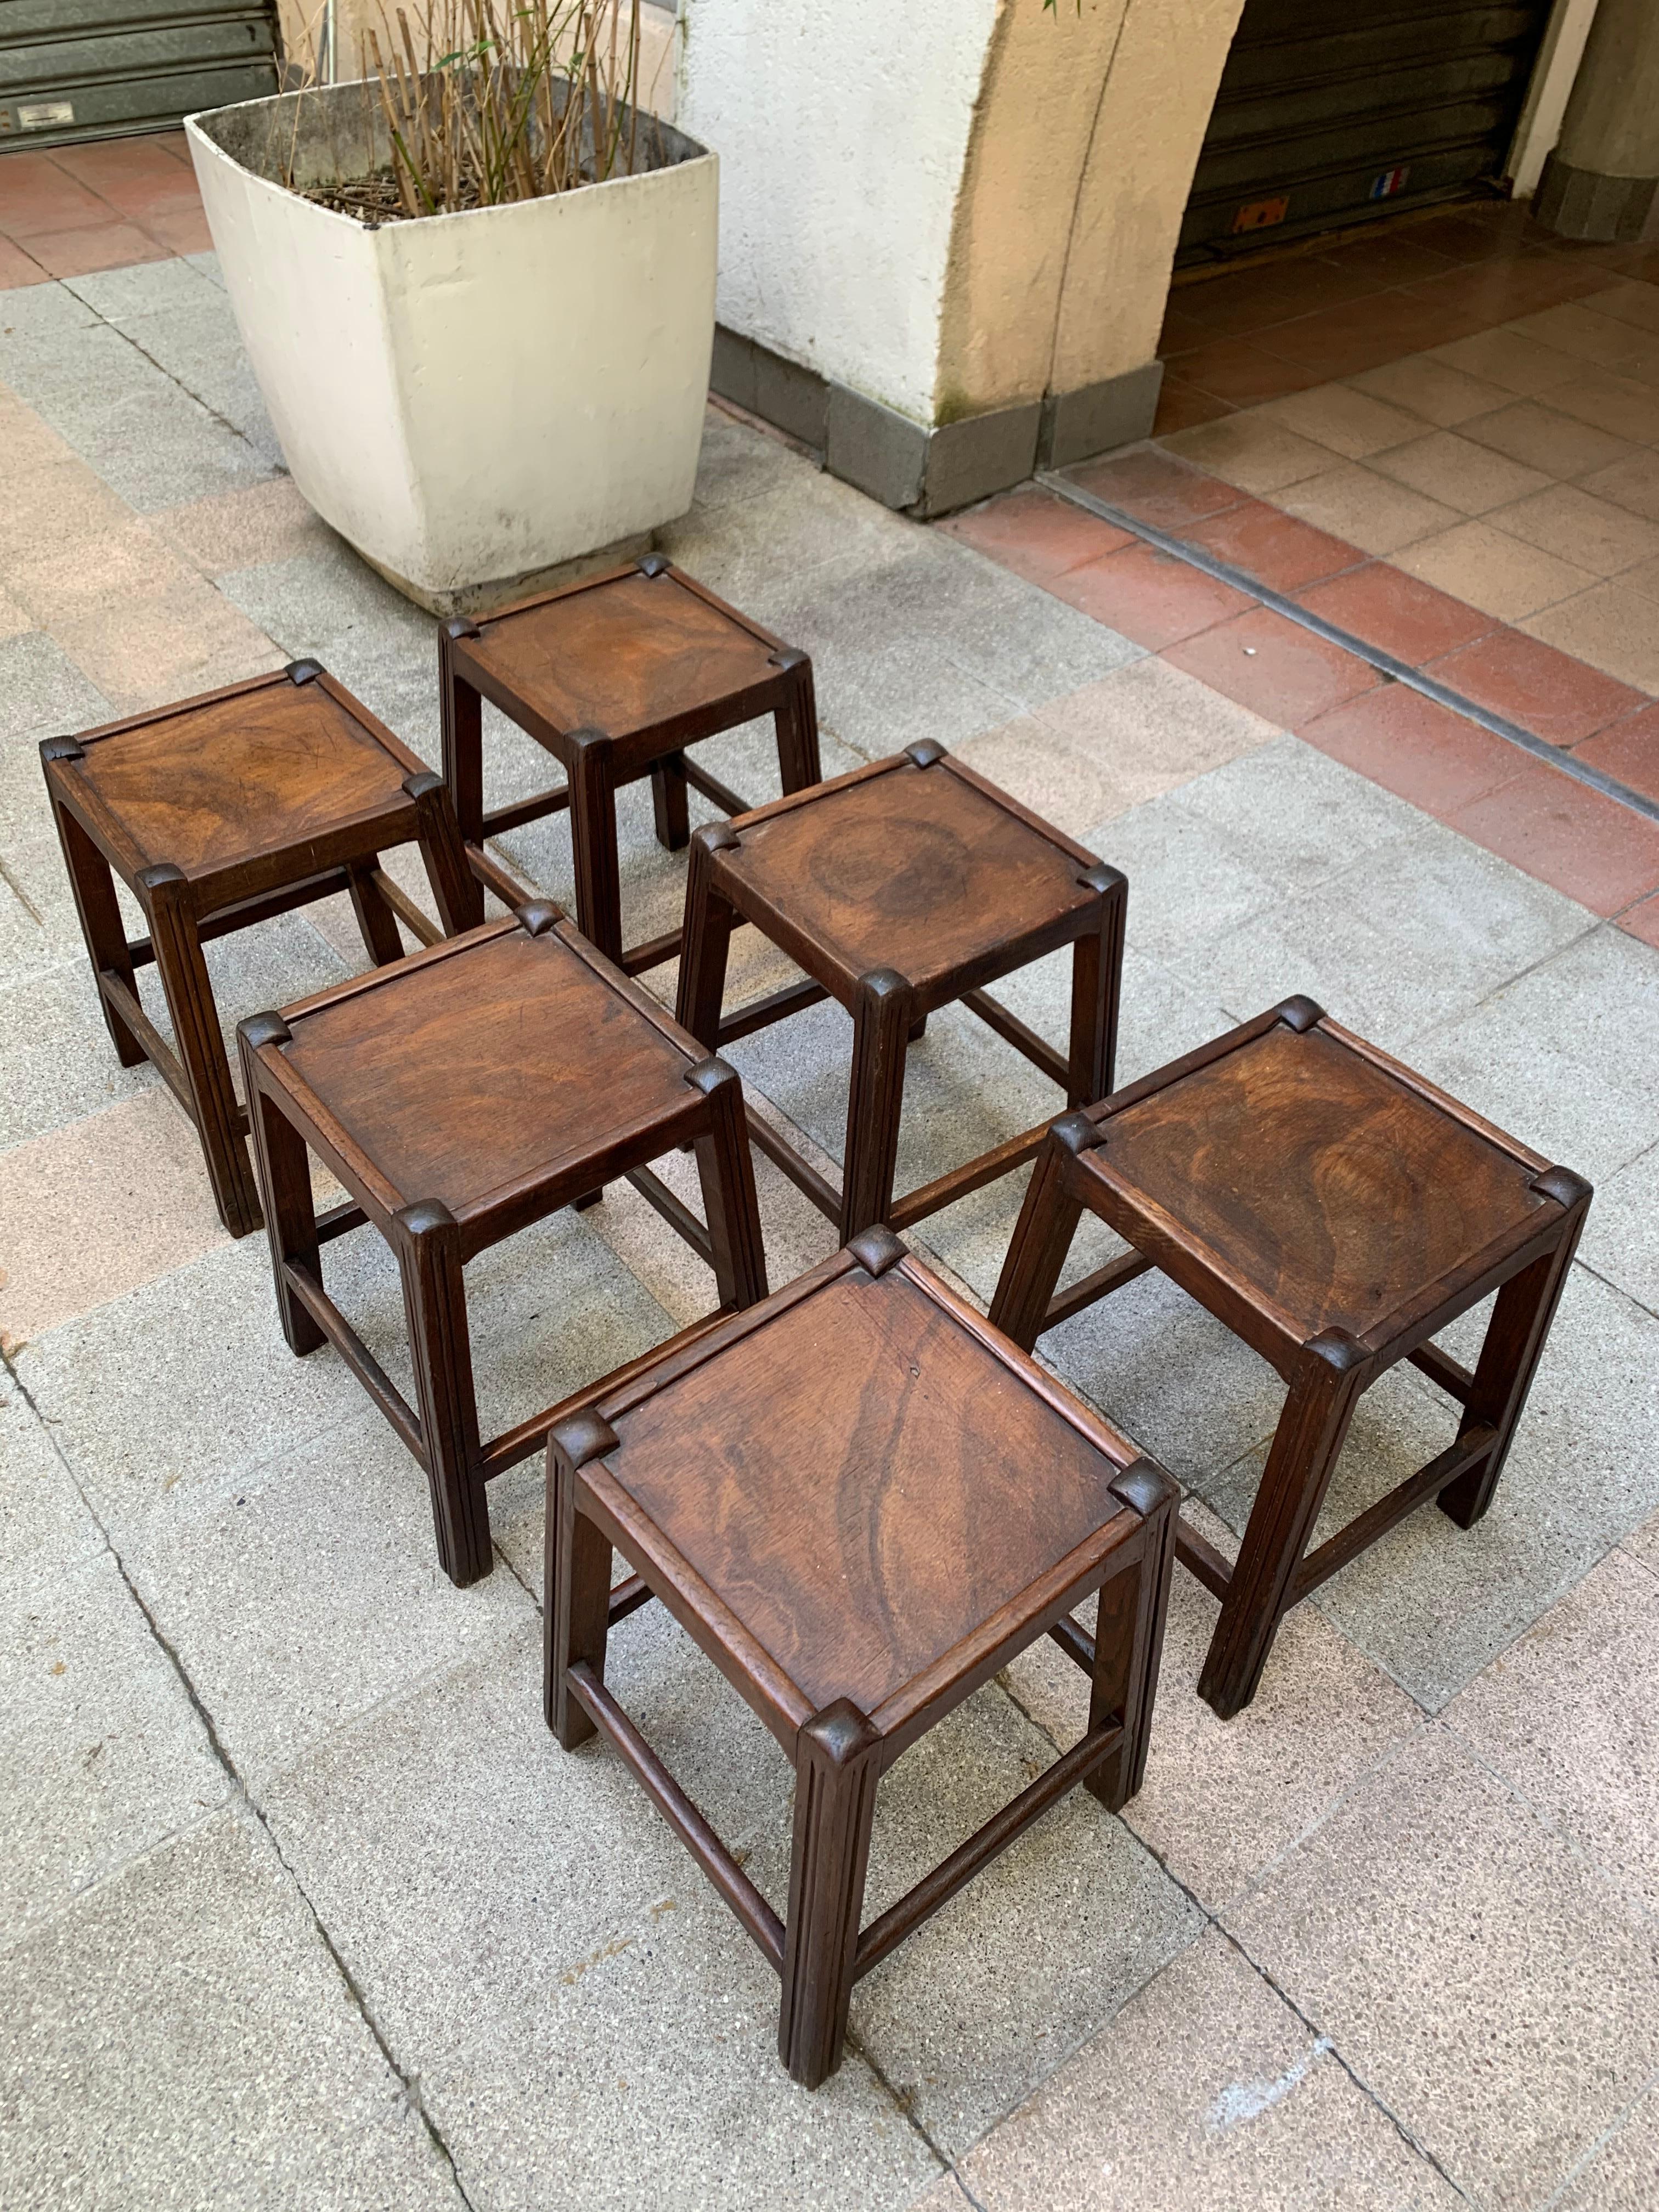 6 stools for the resort of Les Arcs

Circa 1970
In stained beech
Dimensions: H 48 x W 40 x D 40
1200€ for 6 stools.